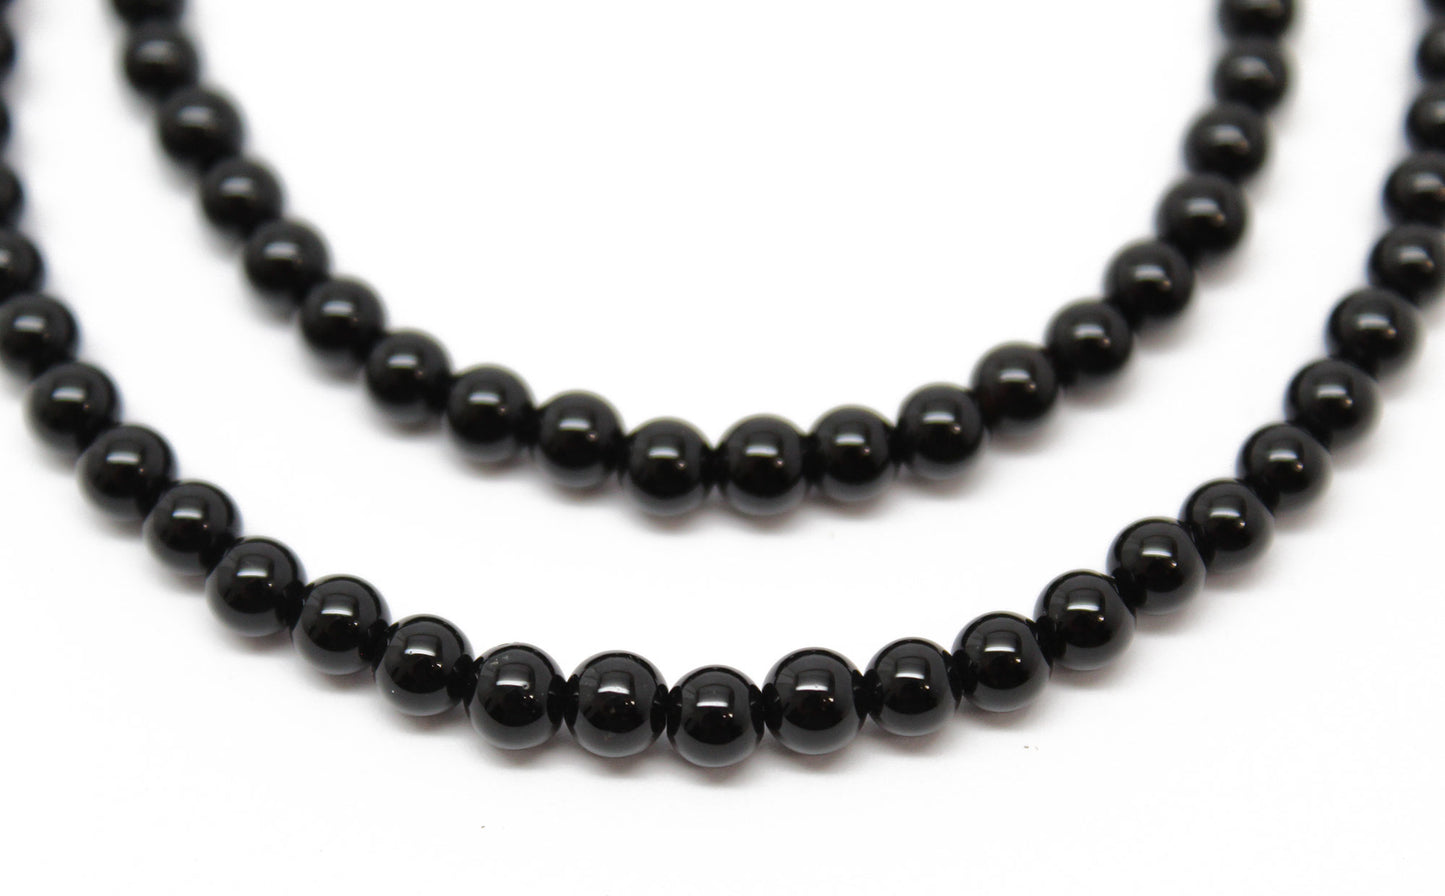 Black Onyx Necklace with Sterling Silver or Gold Filled Clasp, 4mm